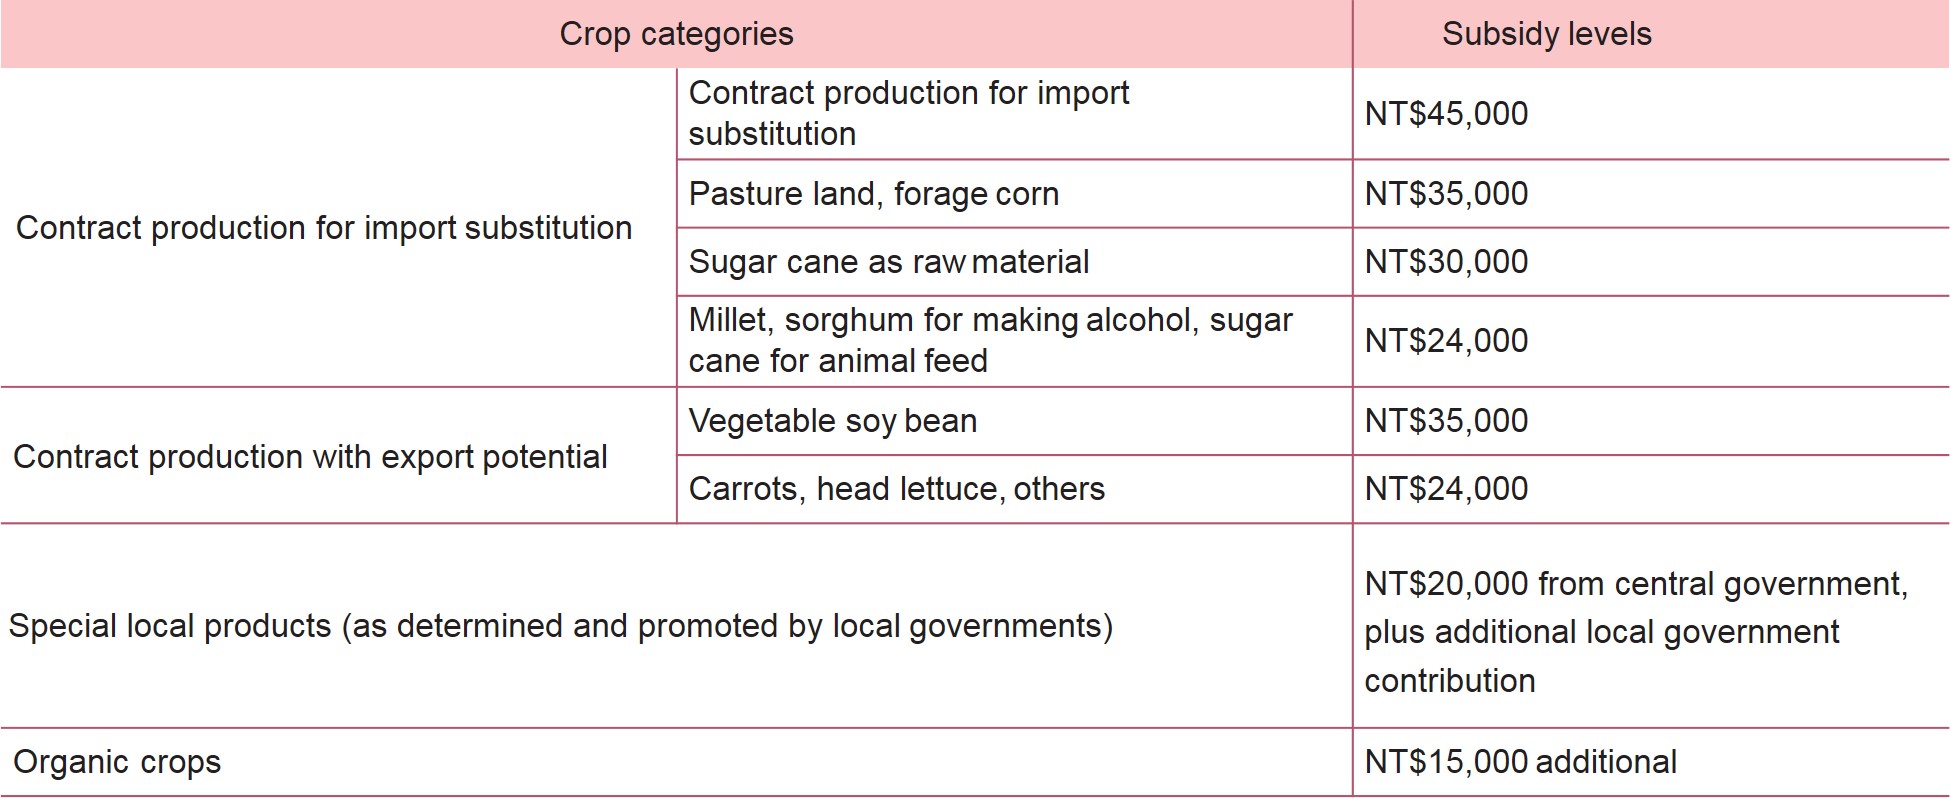 The folllowing table shows the contract crop items that are eligible for subsidies and the subsidy levels per hectare of land per growing season.